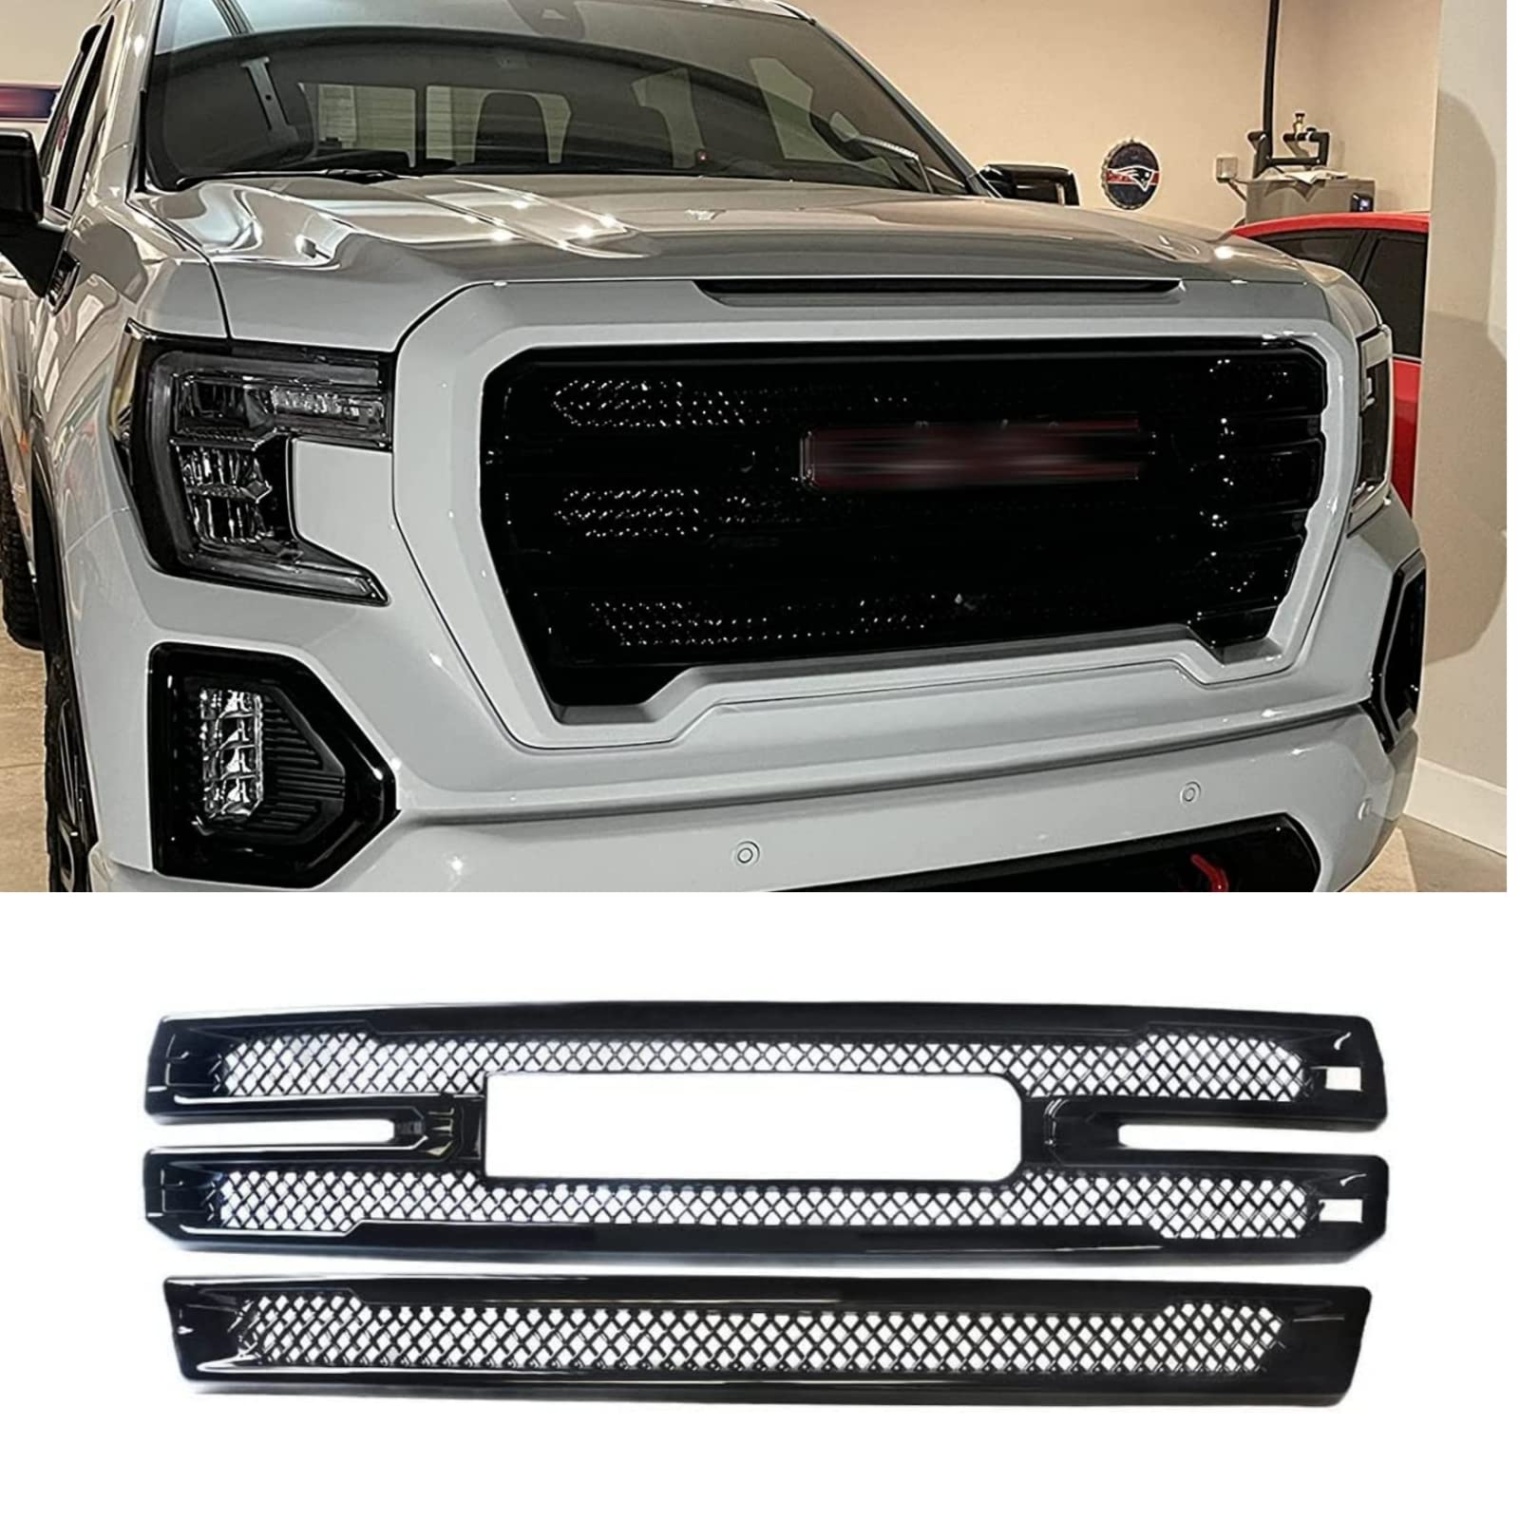 2022 gmc sierra 1500 accessories Bulan 1 Grill Fit For - GMC Sierra  SLT AT Front Grille Cover Front  Bumper ABS Painted Overlay Trim Kit Sierra Accessories Exterior Gloss Black